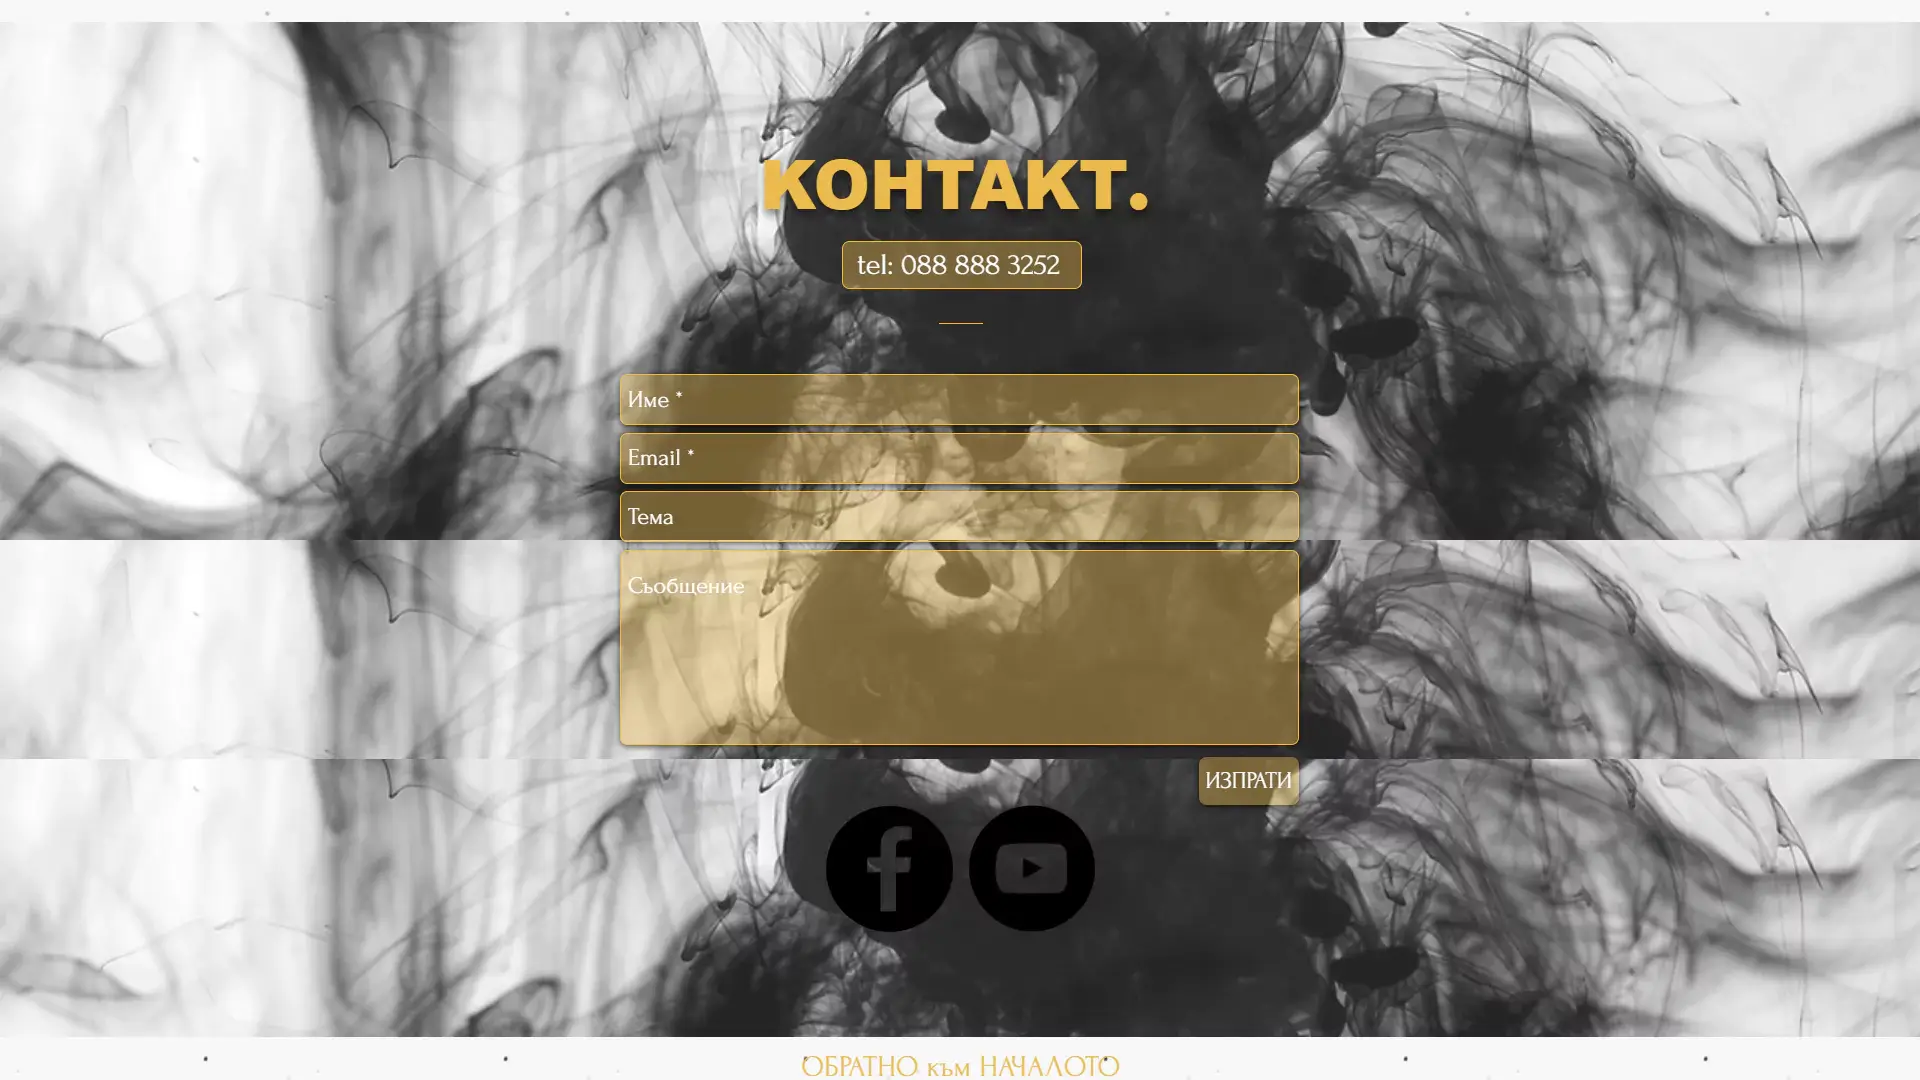 web design projects best ever case study (27)